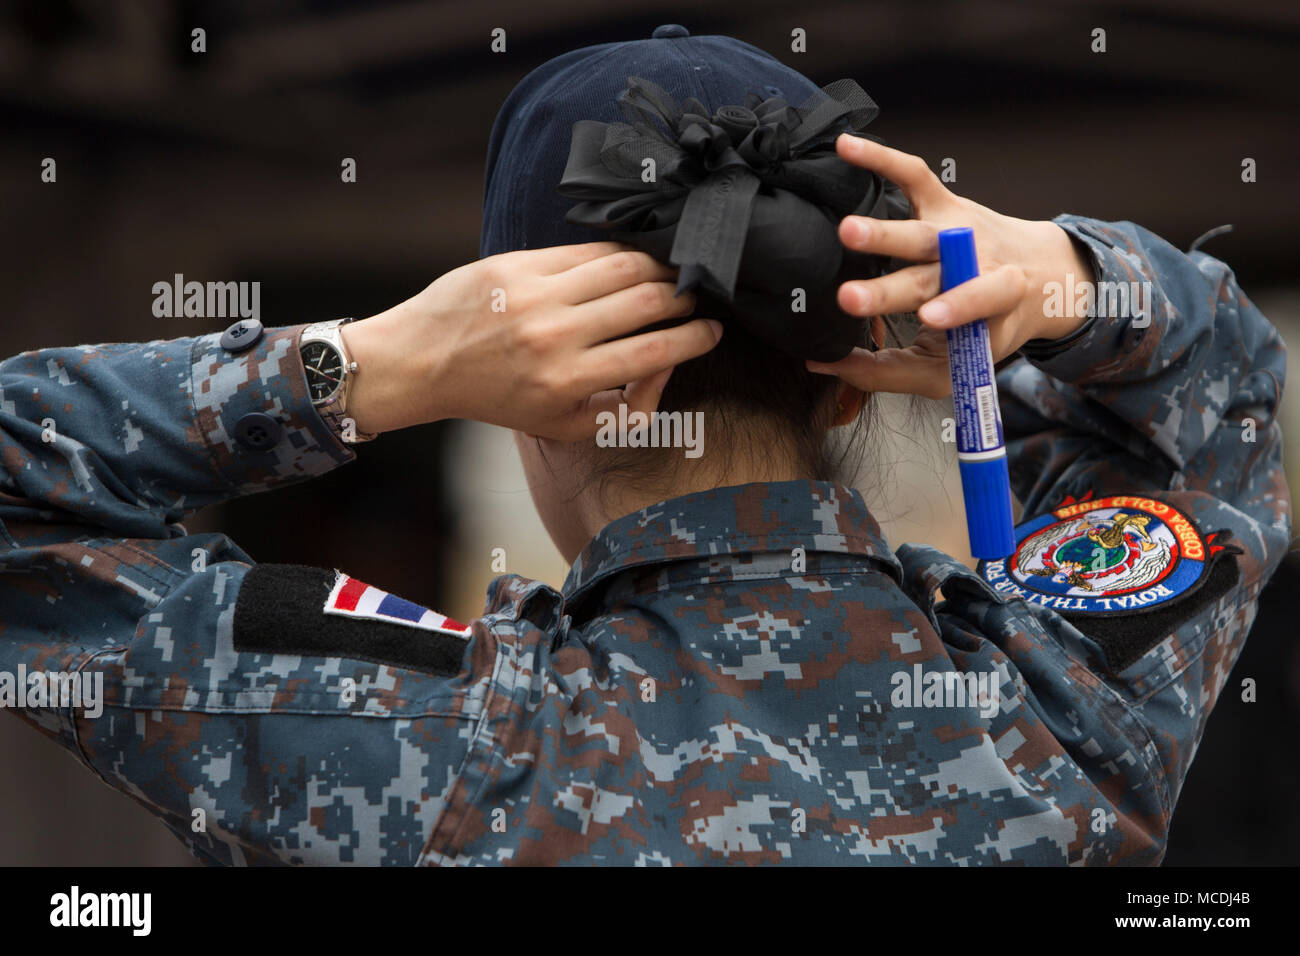 A member of the Royal Thai Air Force fixes her hair during the construction  of a Field Hospital during Exercise Cobra Gold 2018 in Chachoengsao,  Kingdom of Thailand, Feb. 19, 2018. Cobra